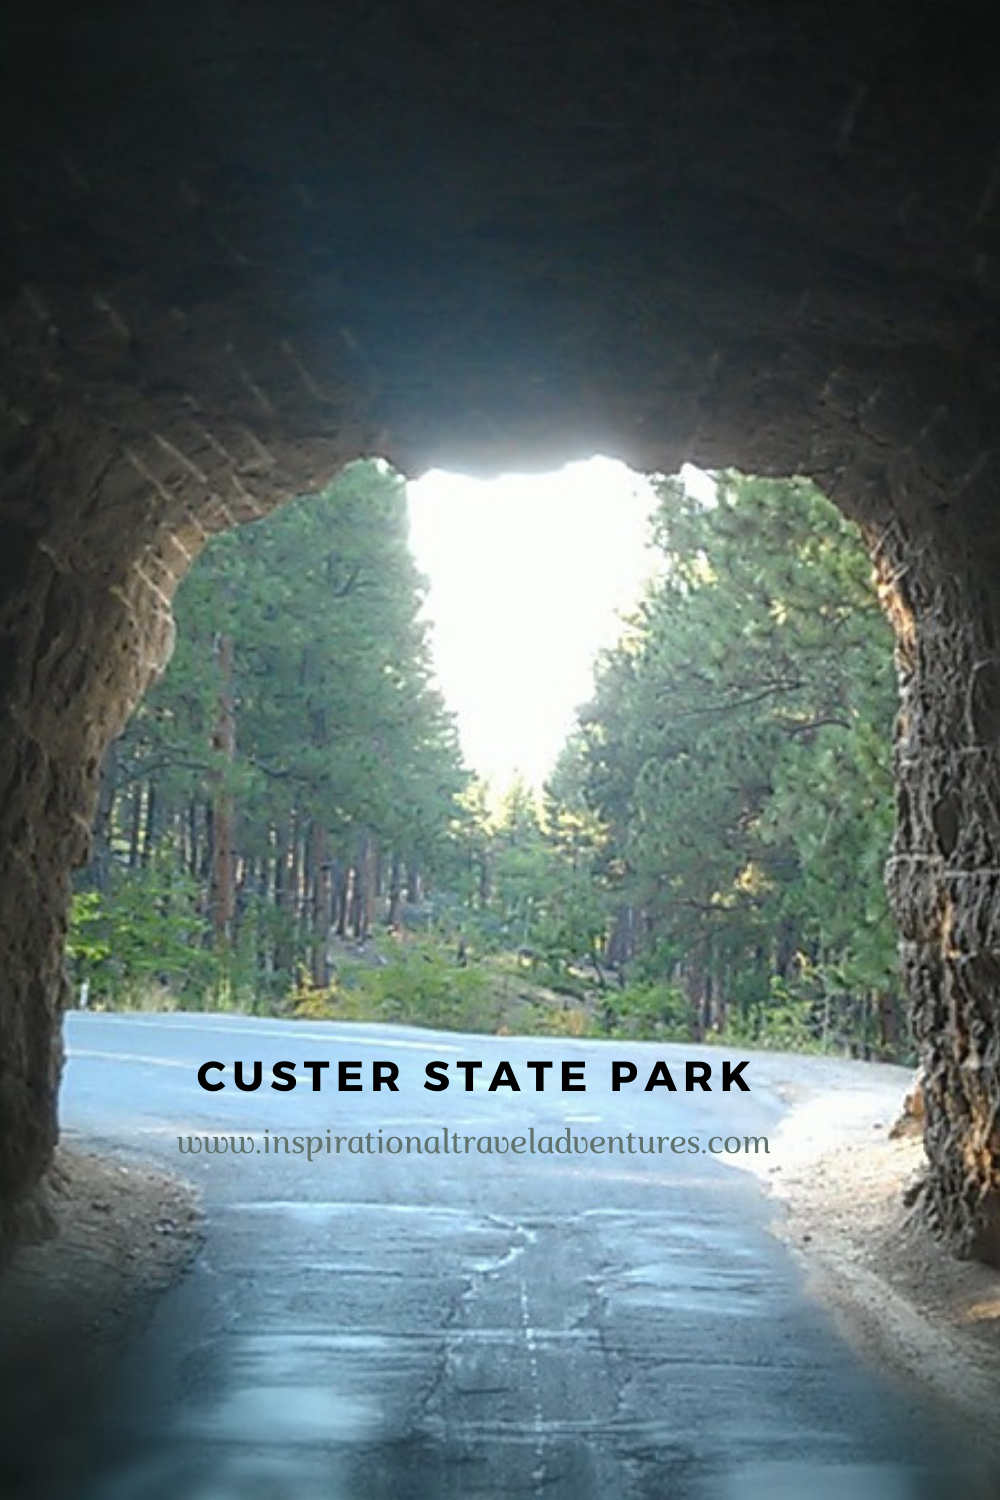 CUSTER STATE PARK TUNNEL